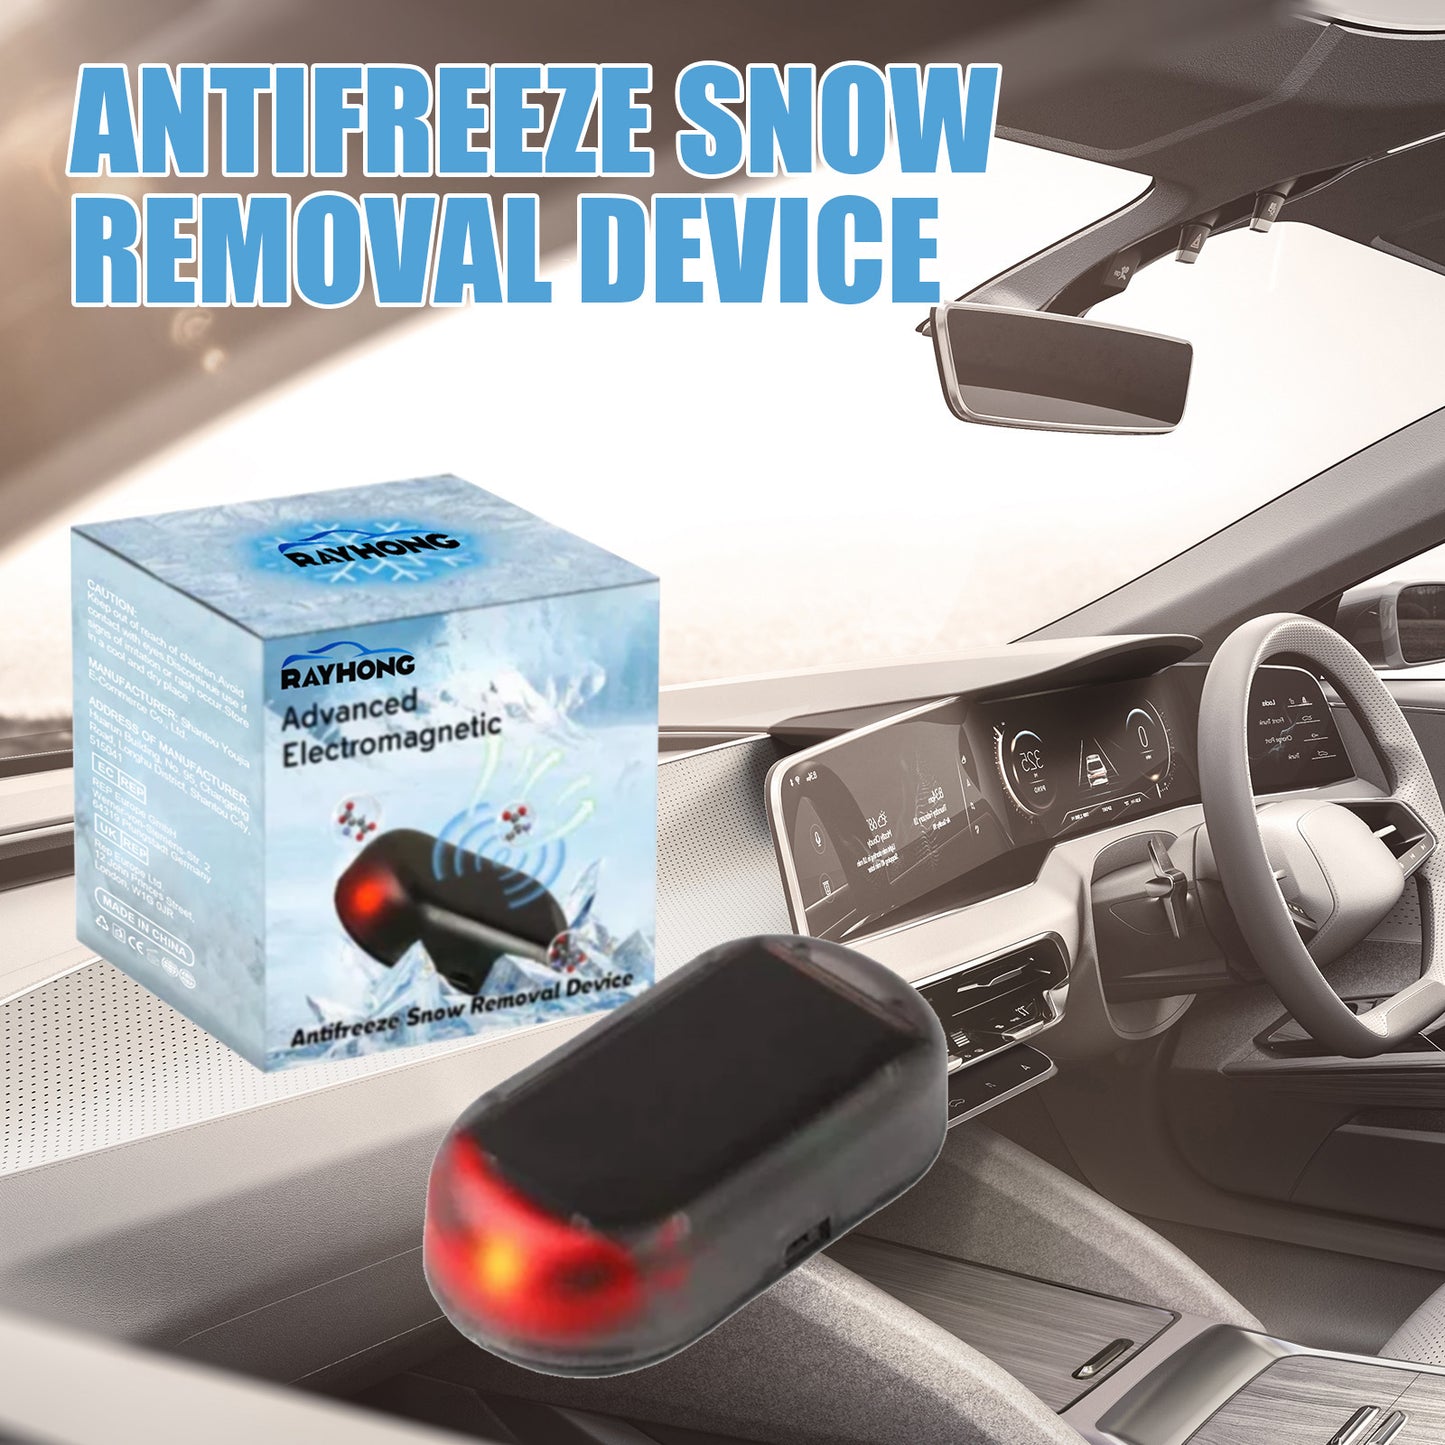 Anti Freeze Auto Snow Removal Device, Cithway Anti-Freeze Electromagnetic  Car Snow Removal Device, Mini Portable Cithway Advanced Electromagnetic